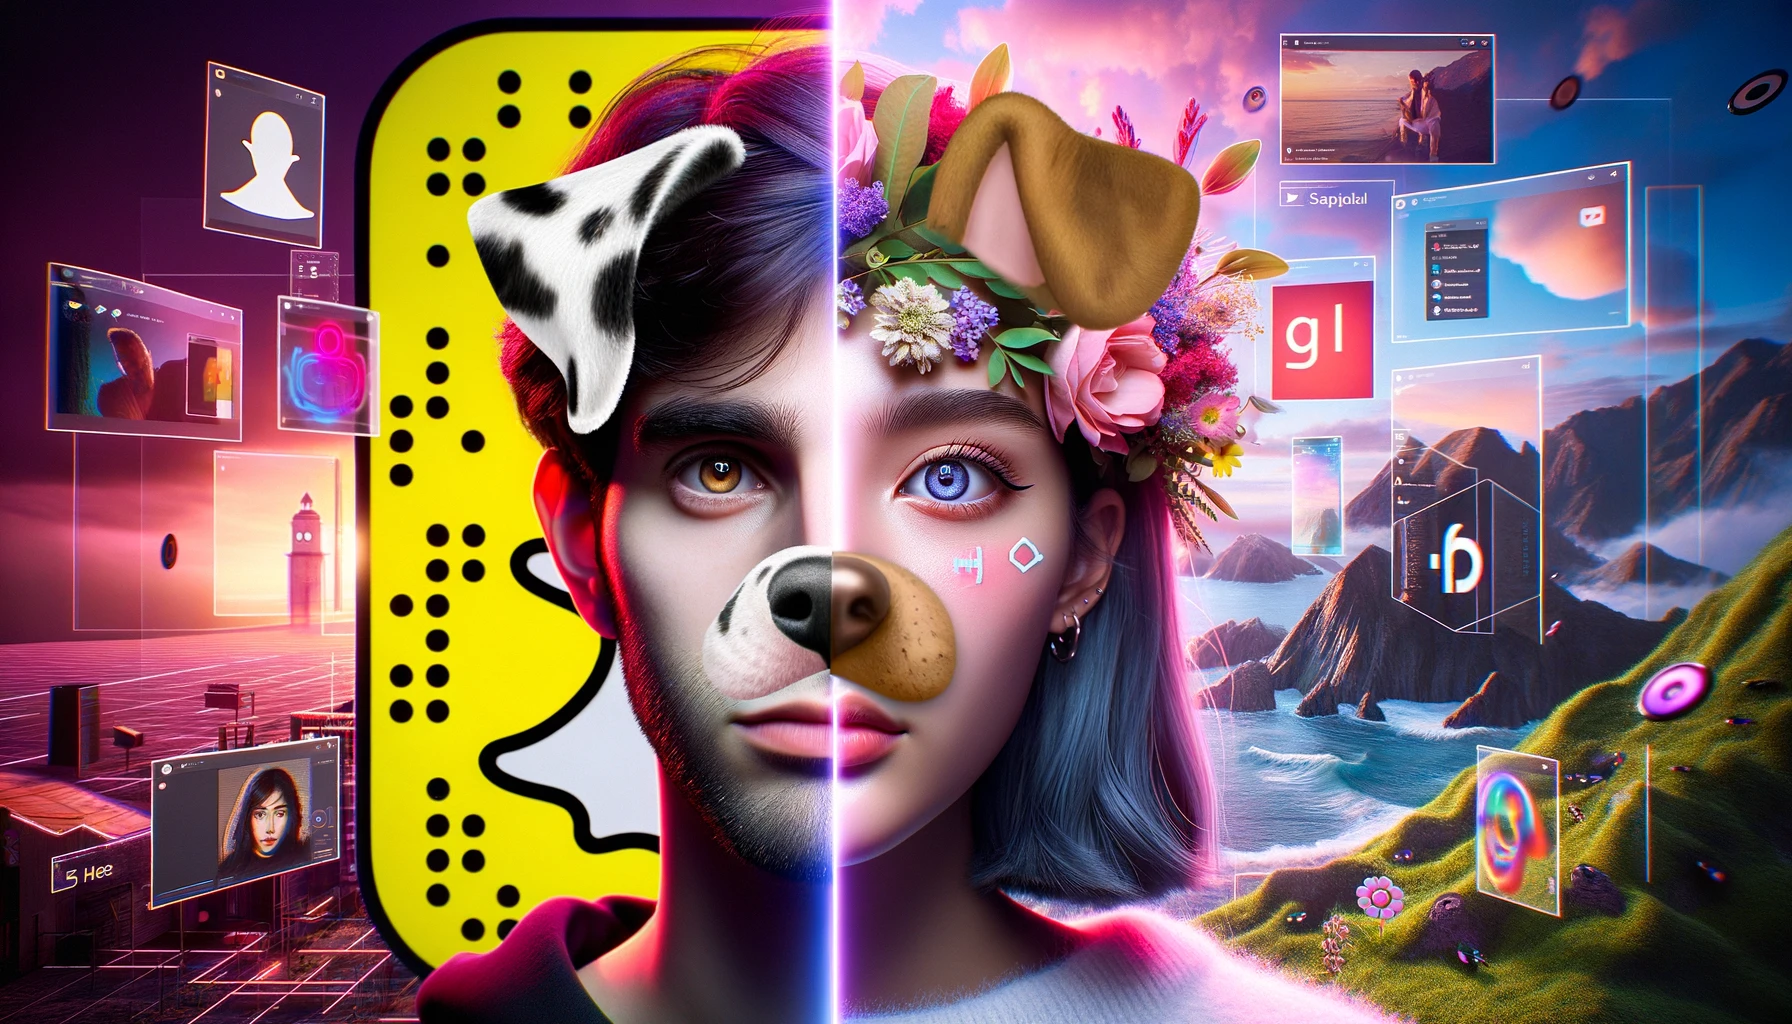 The image showcases a split-screen portrait with a Gen Z face on one side and a Millennial face on the other. Each face juxtaposes the whimsy of Snapchat filters with their raw, unfiltered counterparts. The backdrop is a digital playground infused with elements reminiscent of Unreal Engine 5 graphics, centered around Snapchat's iconic ghost logo. The vivid colors, modern feel, and contrast between the ephemeral details and reality make it a captivating piece, reminiscent of styles trending on Artstation.